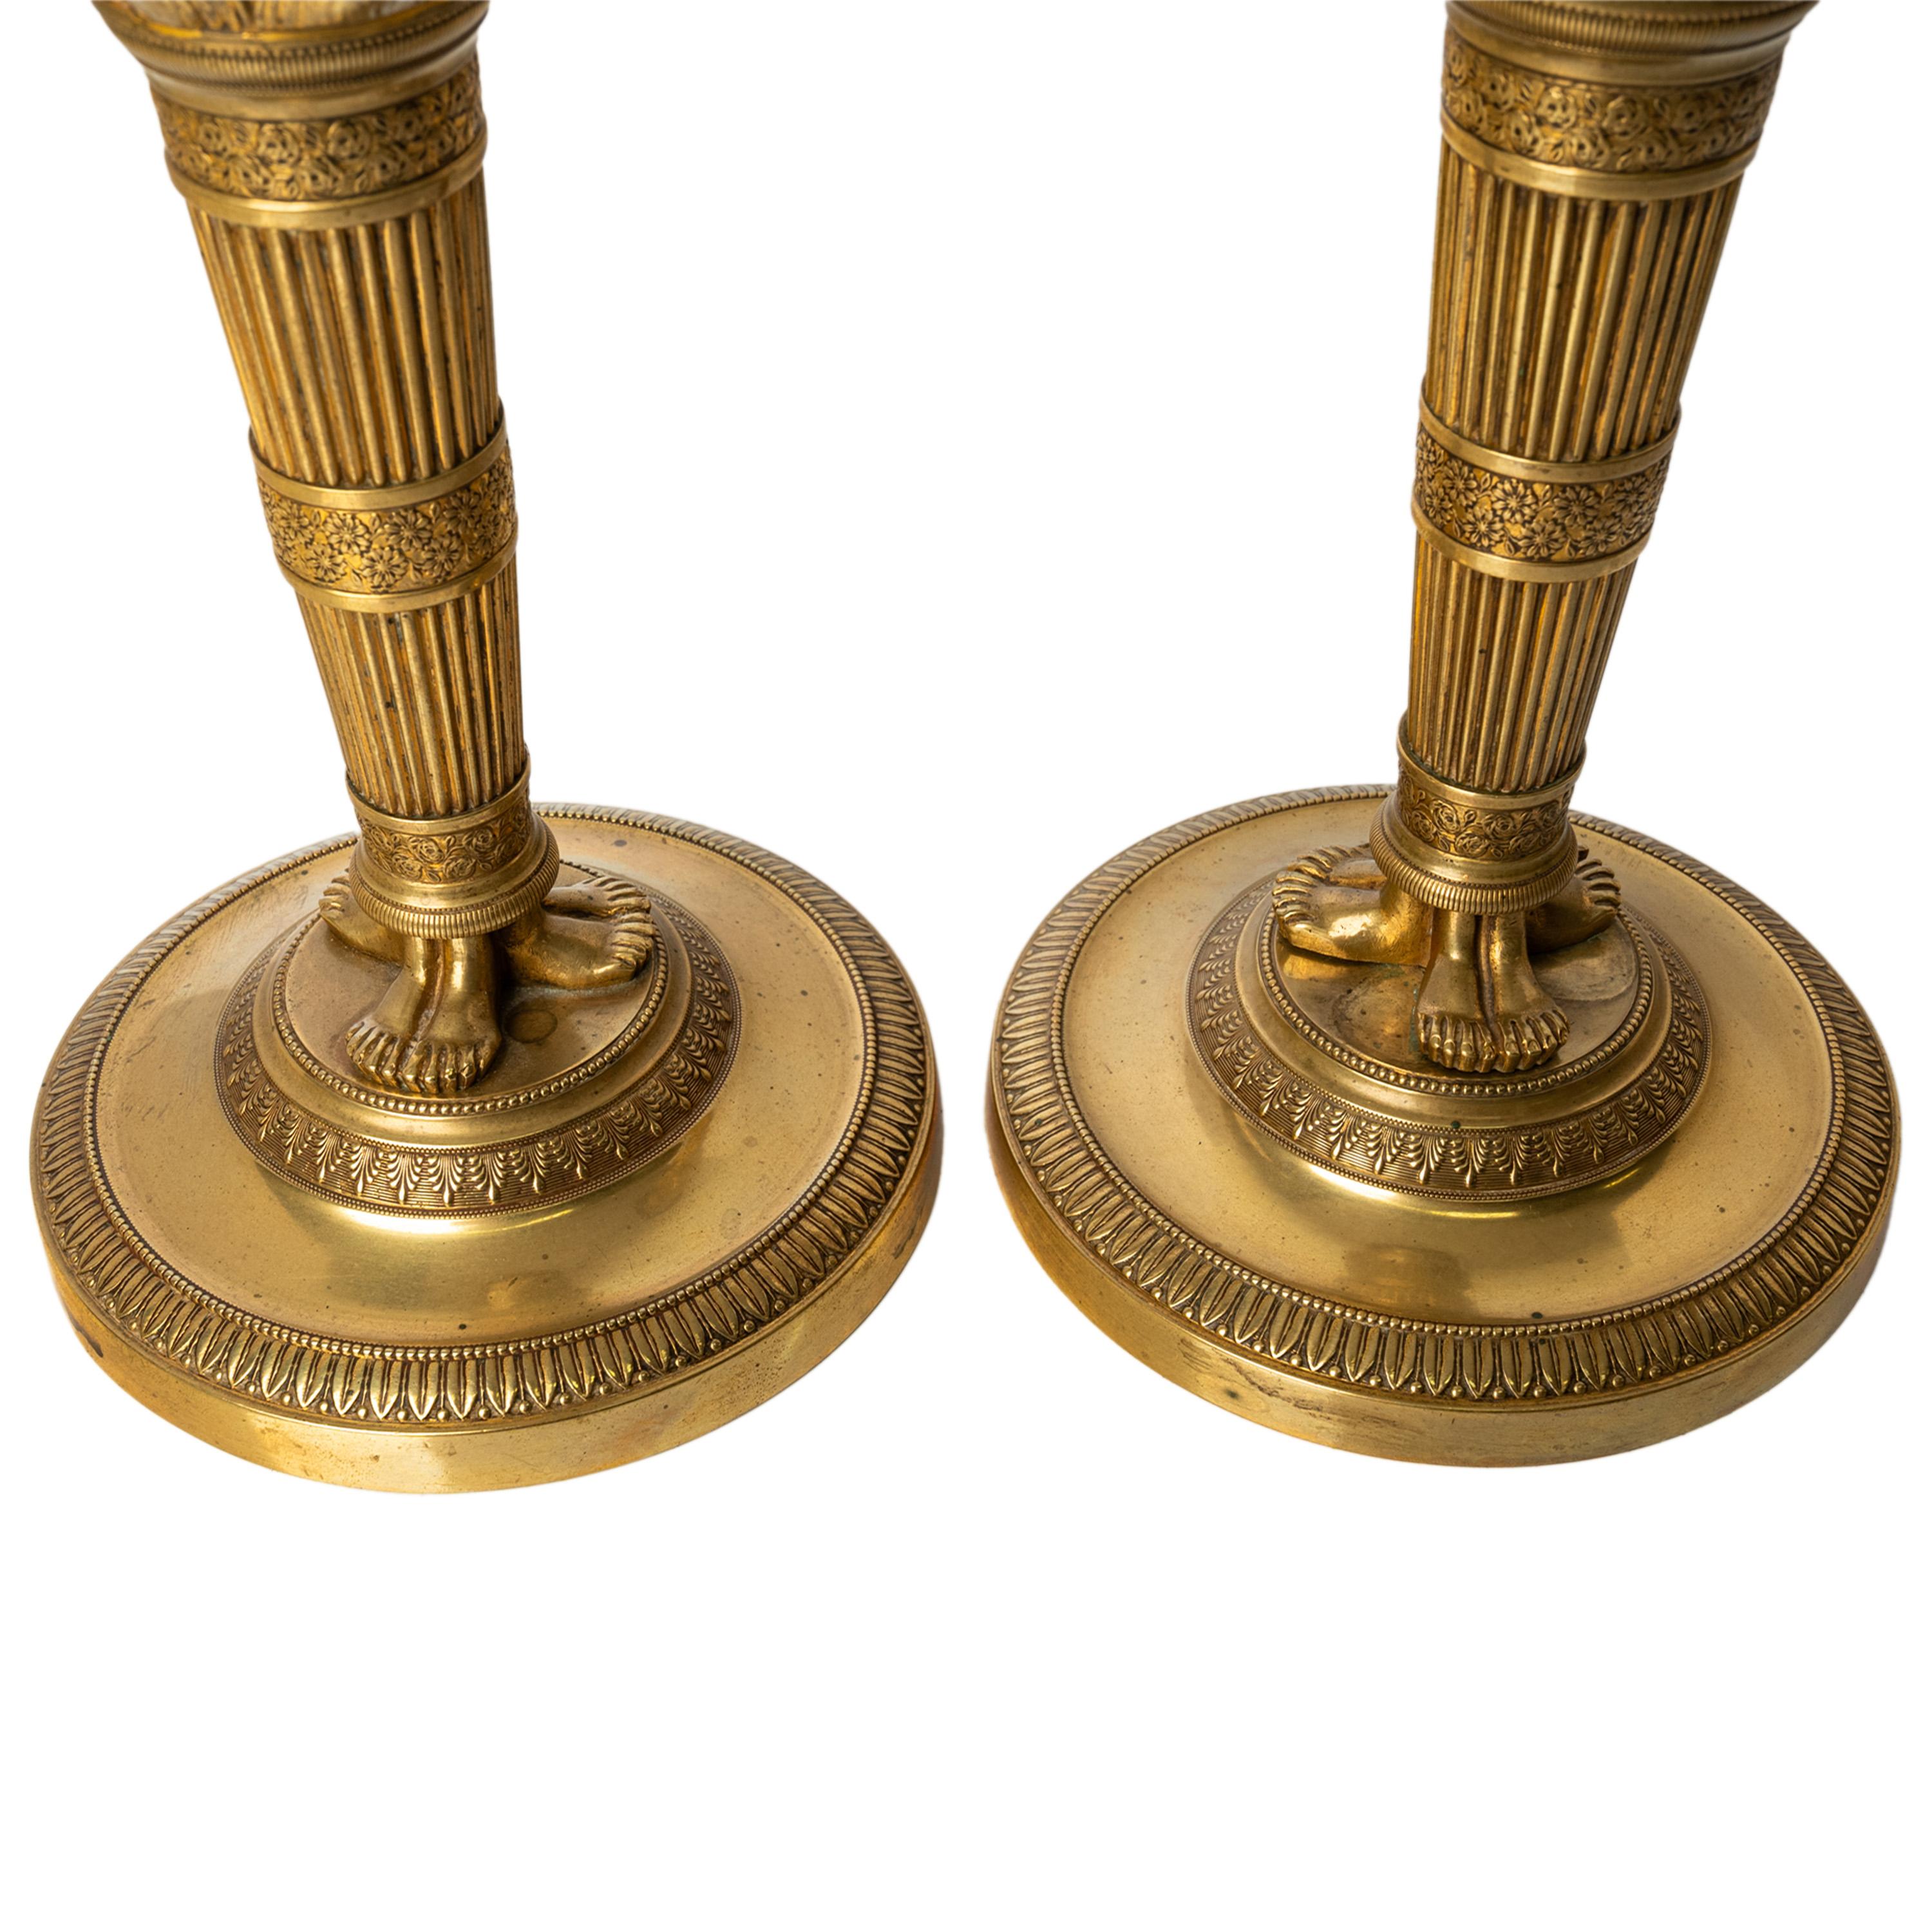 Pair Antique Early 19thC French Empire Neoclassical Gilt Bronze Candlesticks For Sale 11